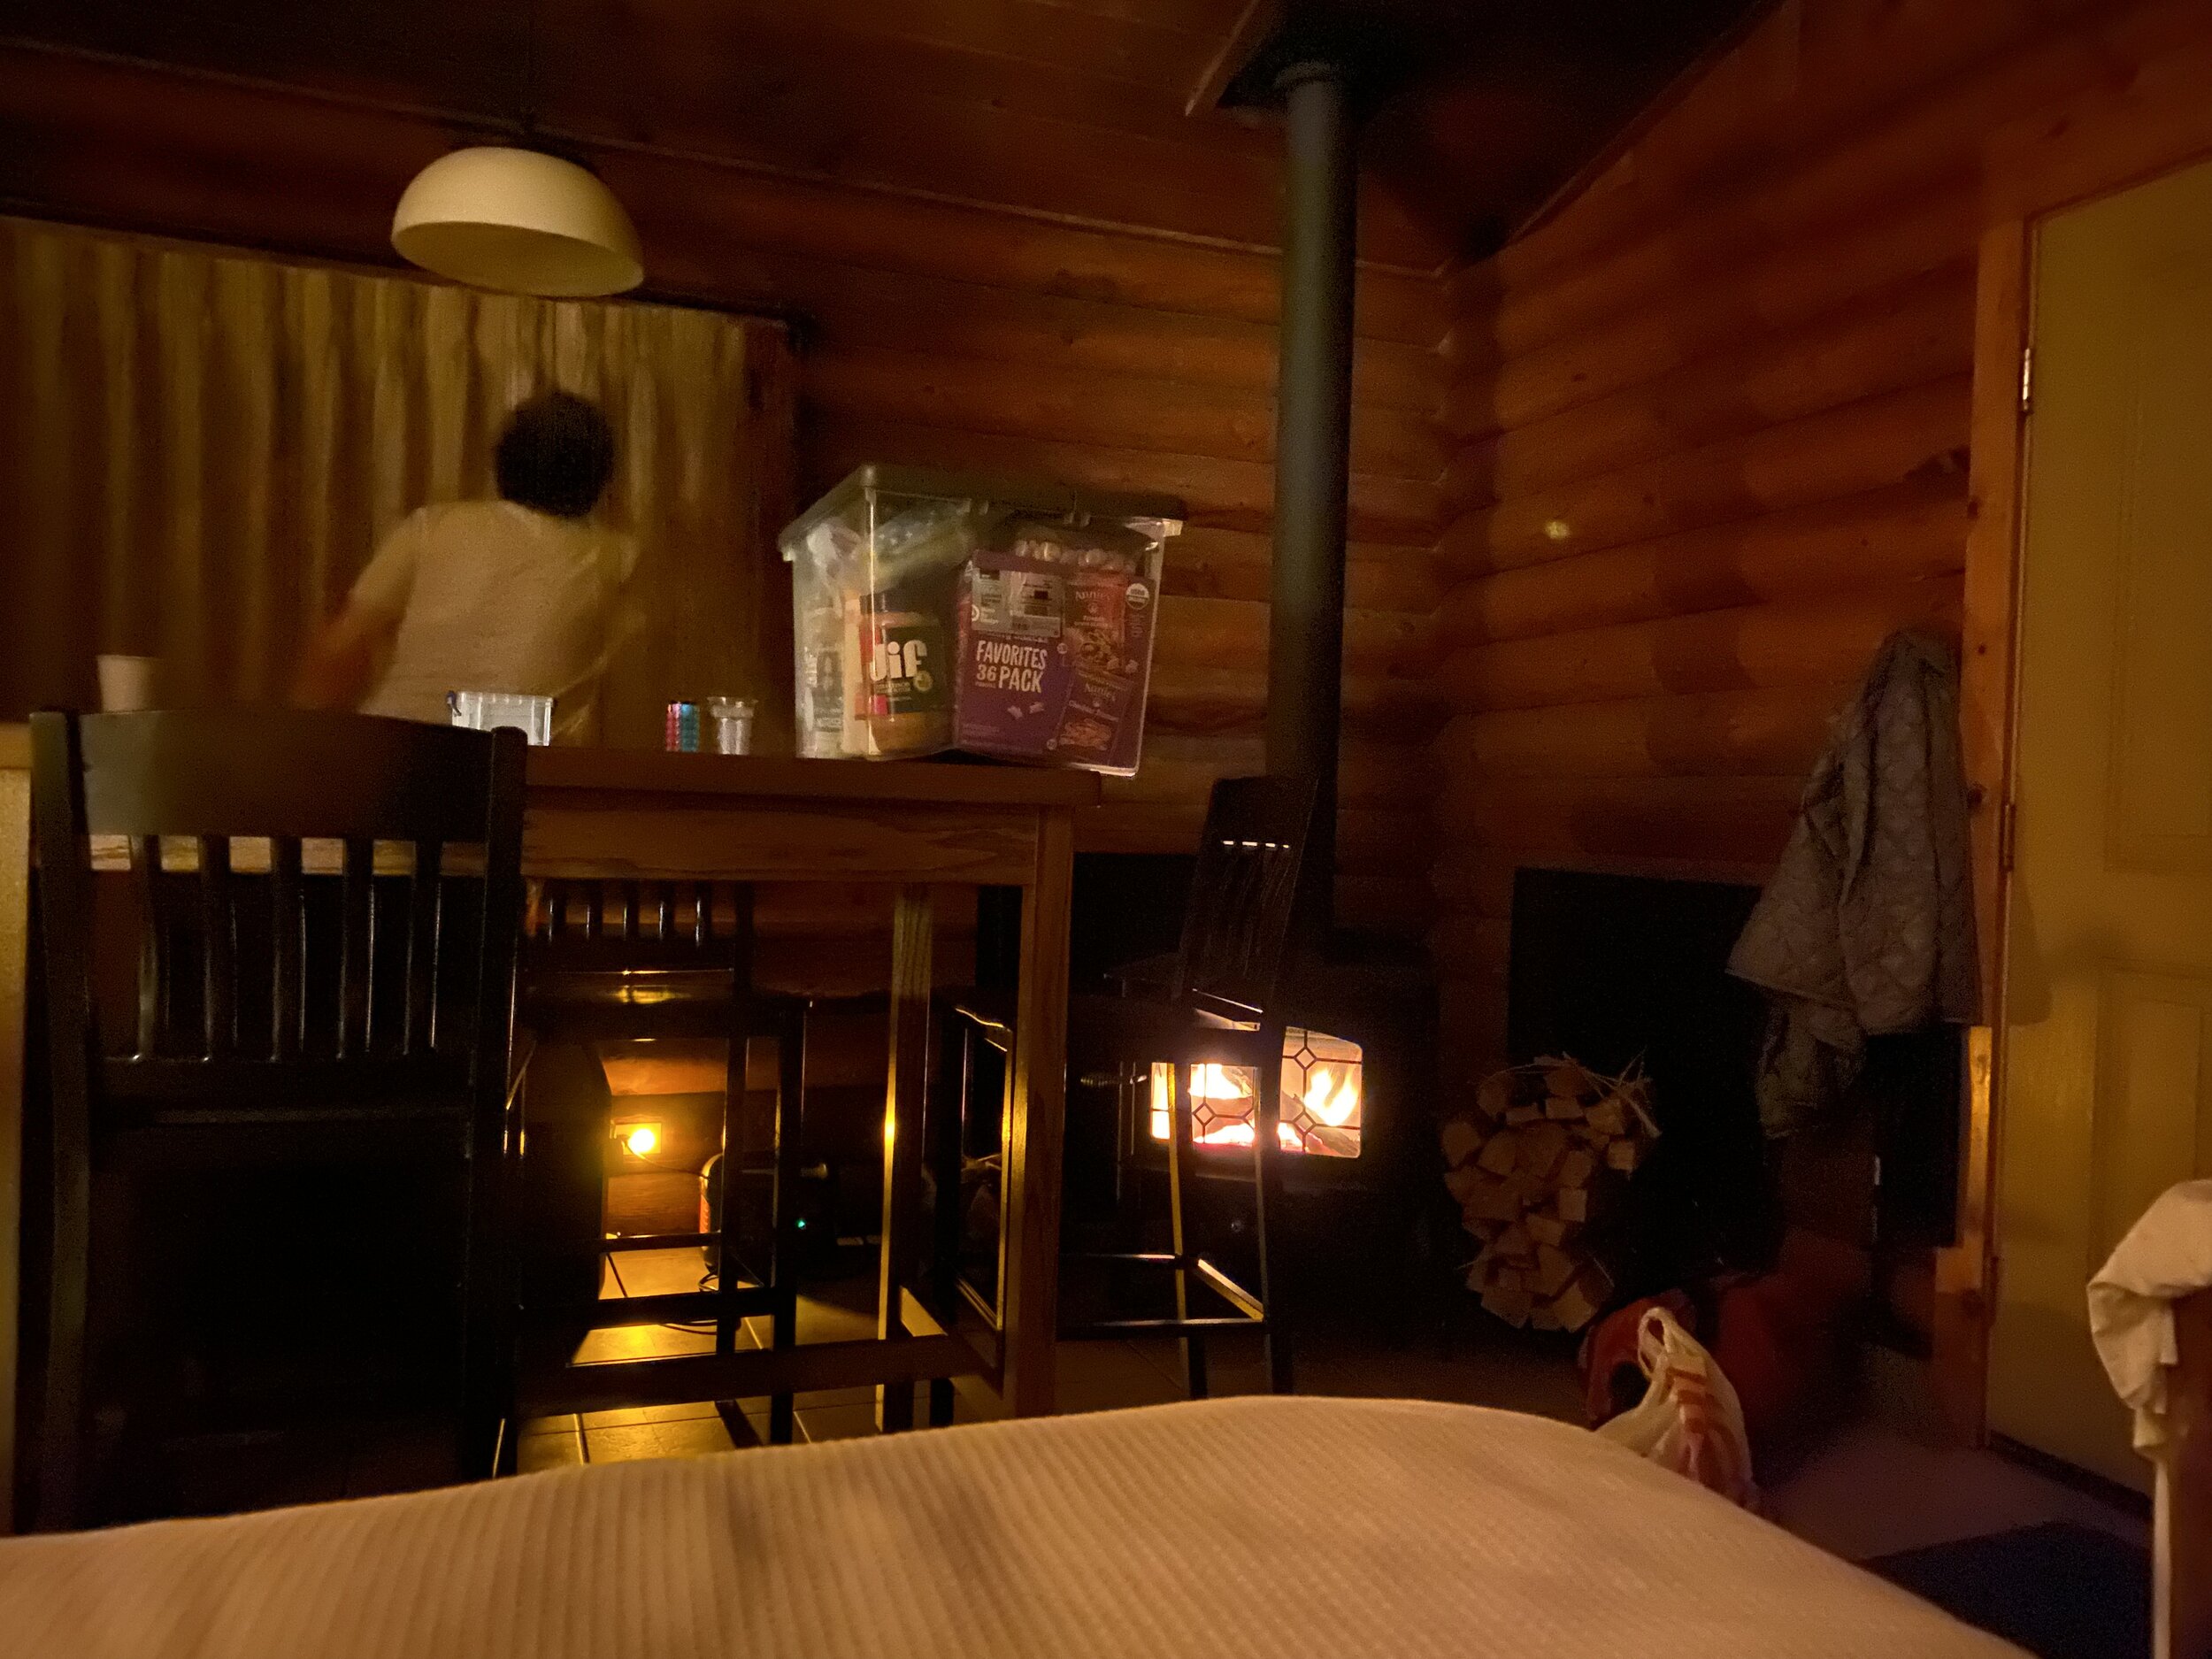 Our awesome fireplace in our cabin at Kalaloch.  Photo (and fire) by Karen Boudreaux, June 15, 2021